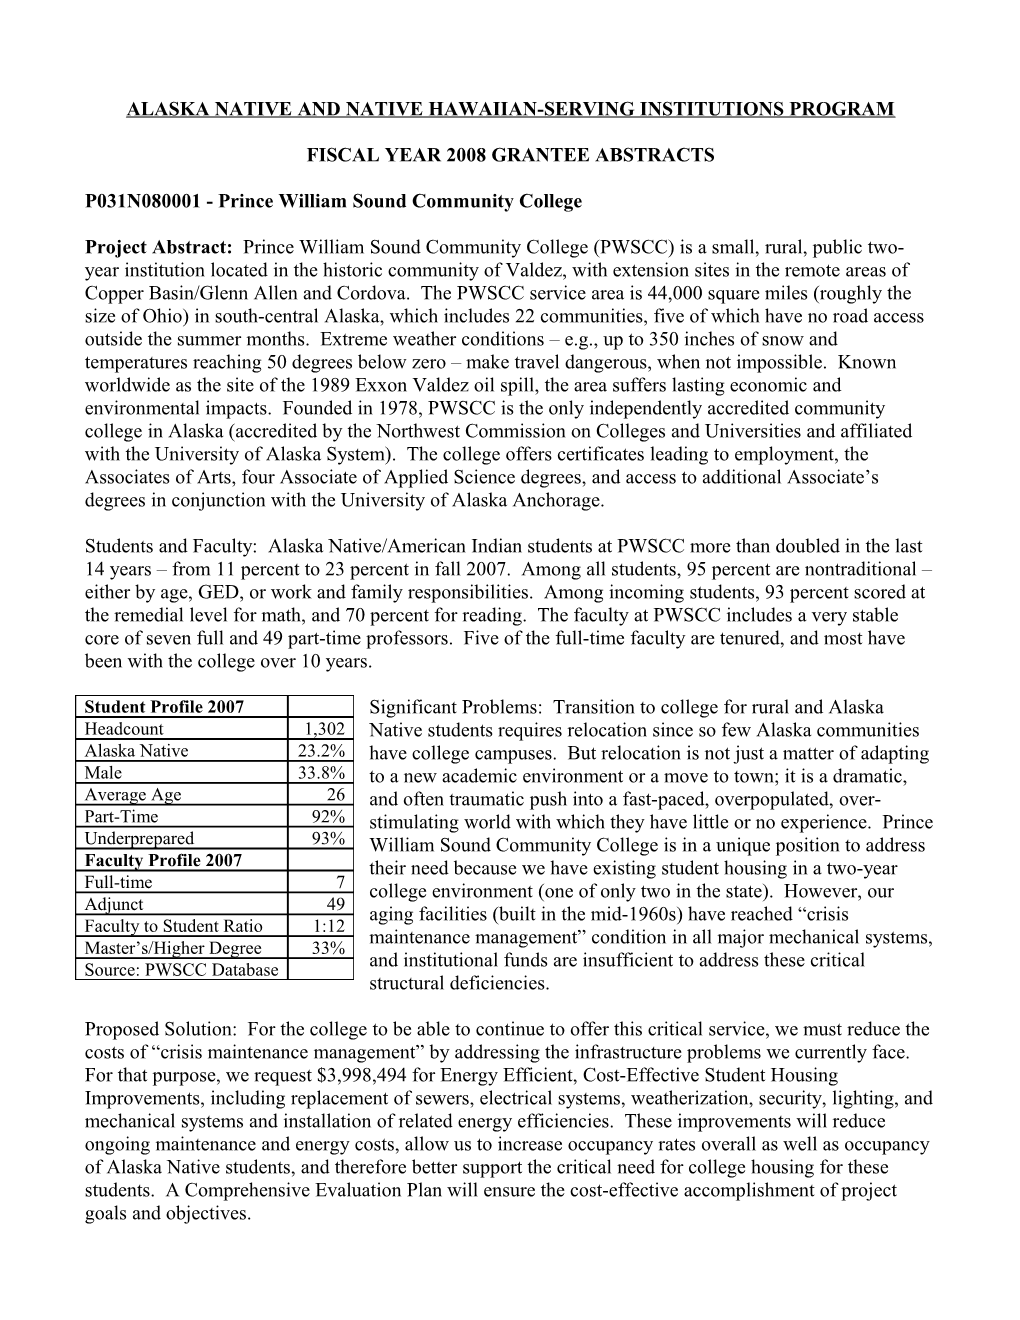 FY 2008 Project Abstracts for the Alaska Native and Native Hawaiian-Serving Institutions